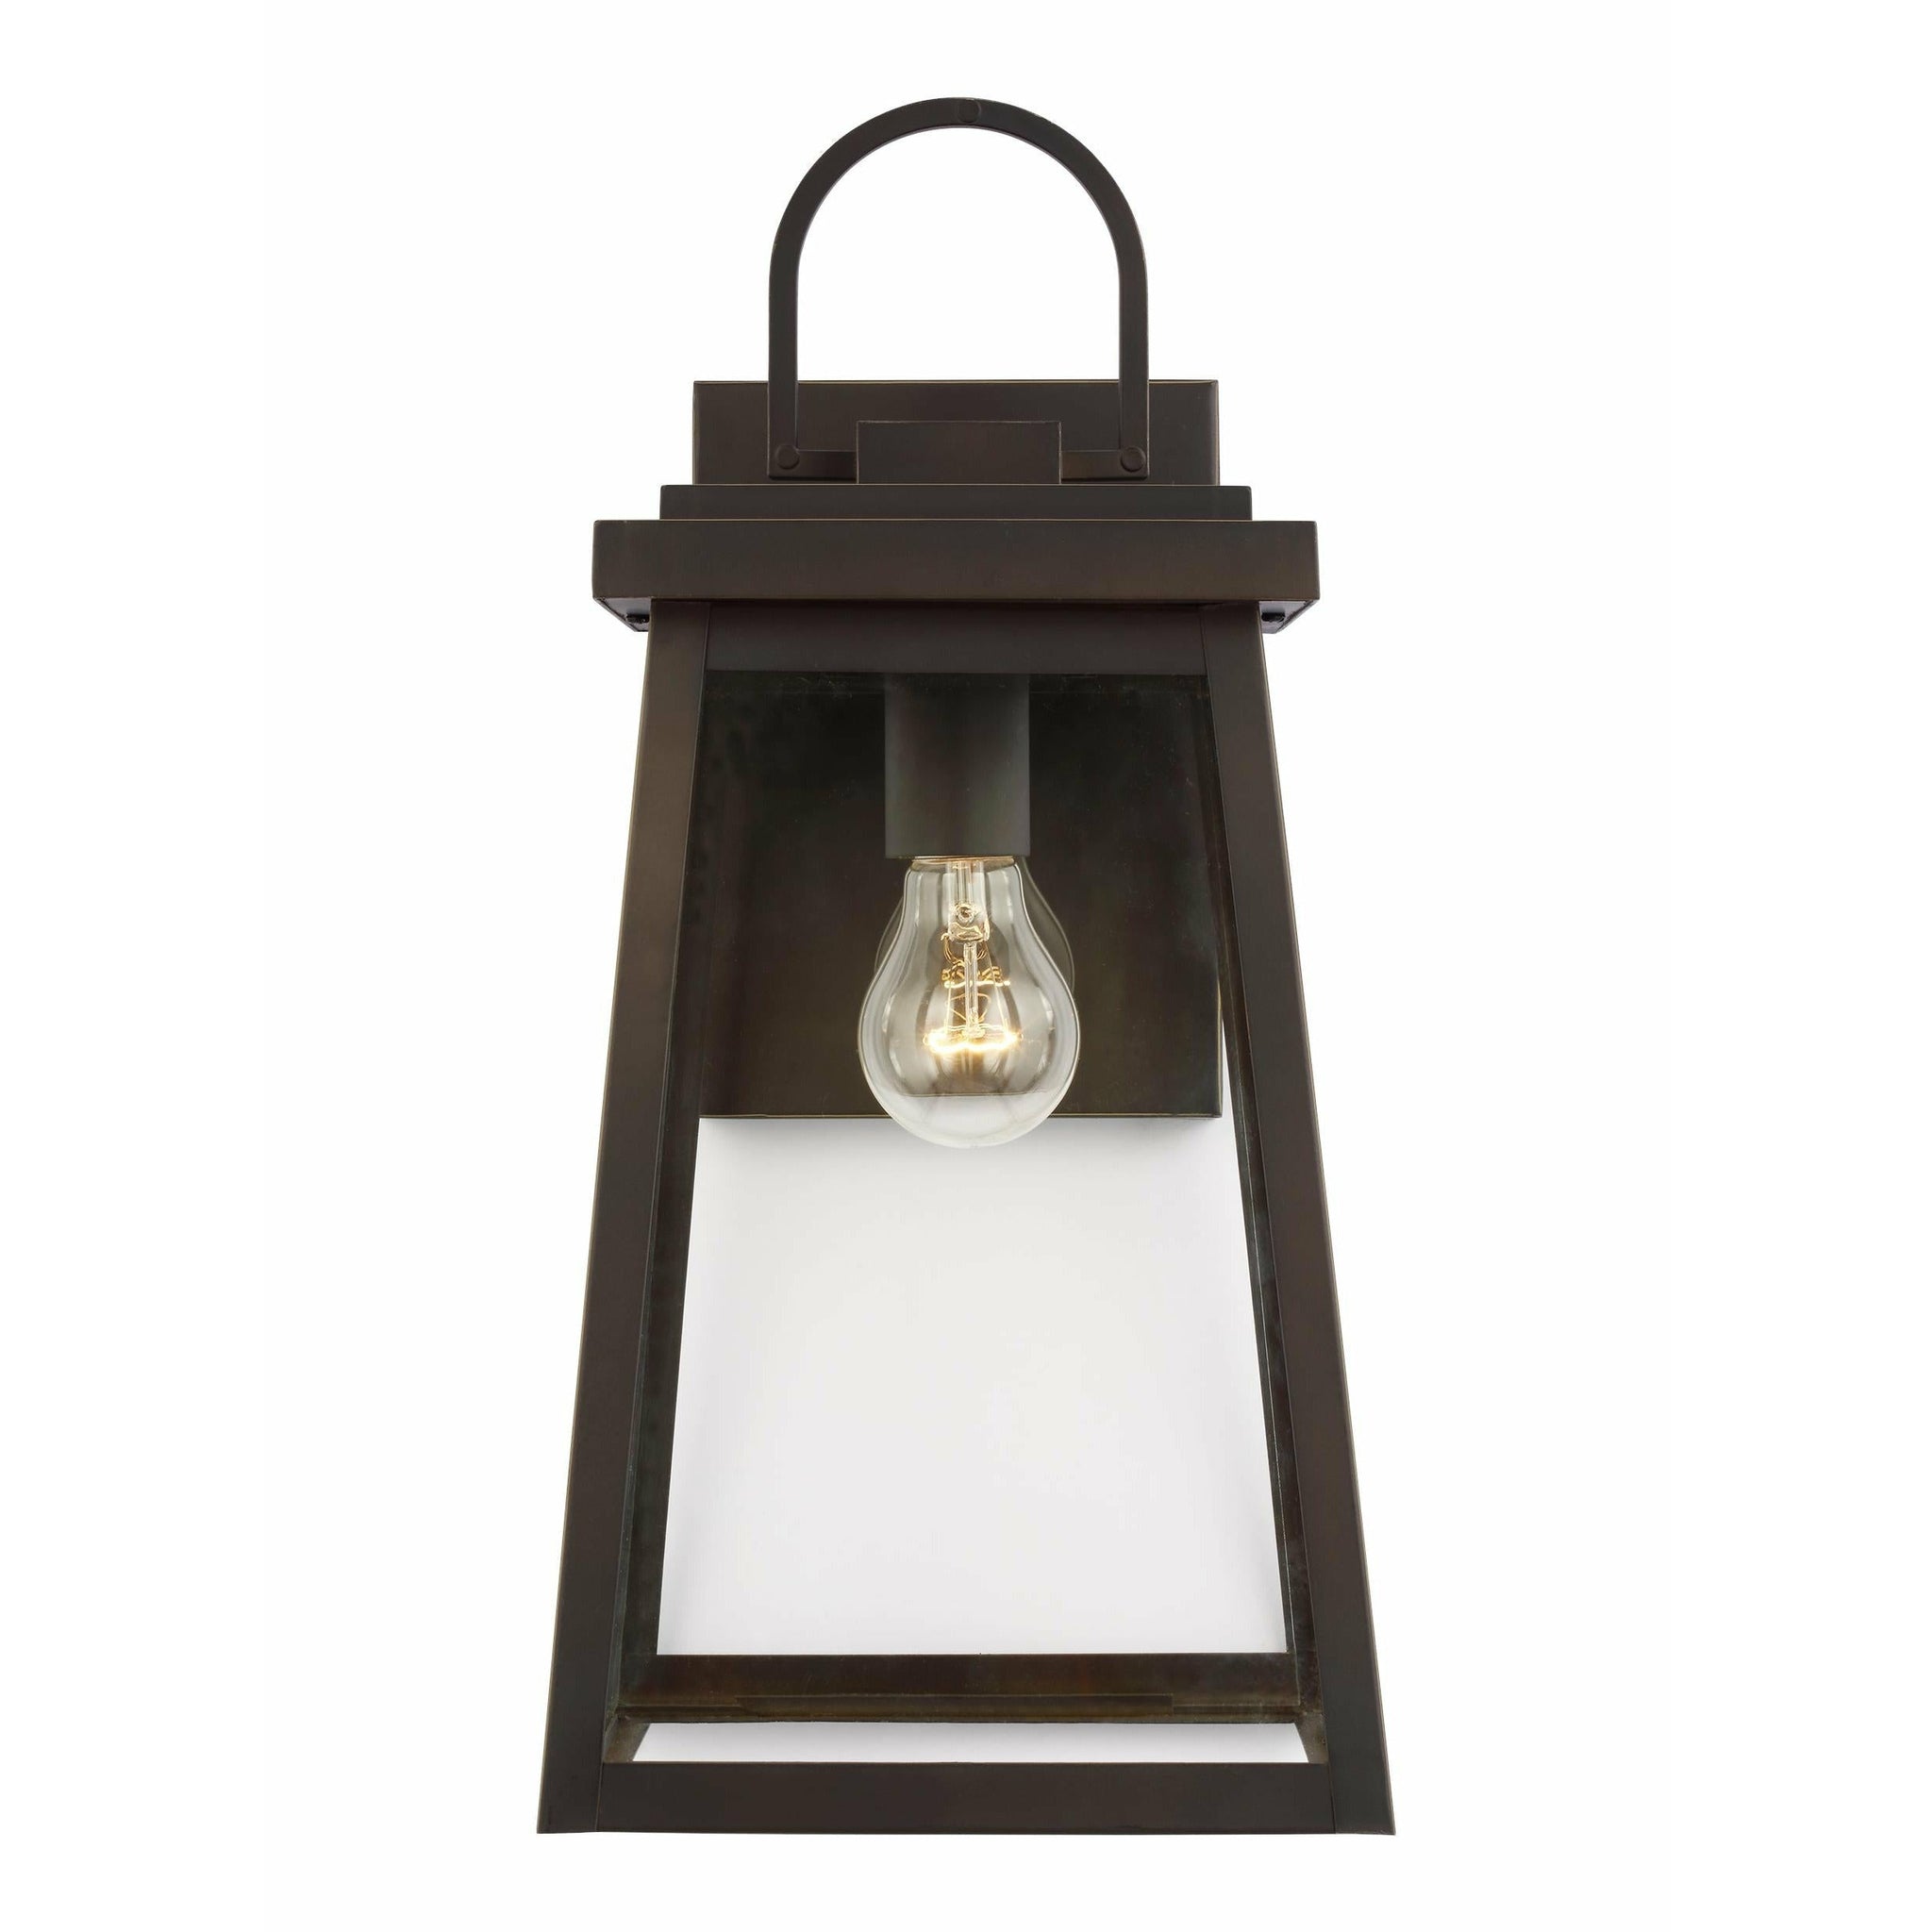 Founders Large 1-Light Outdoor Wall Light